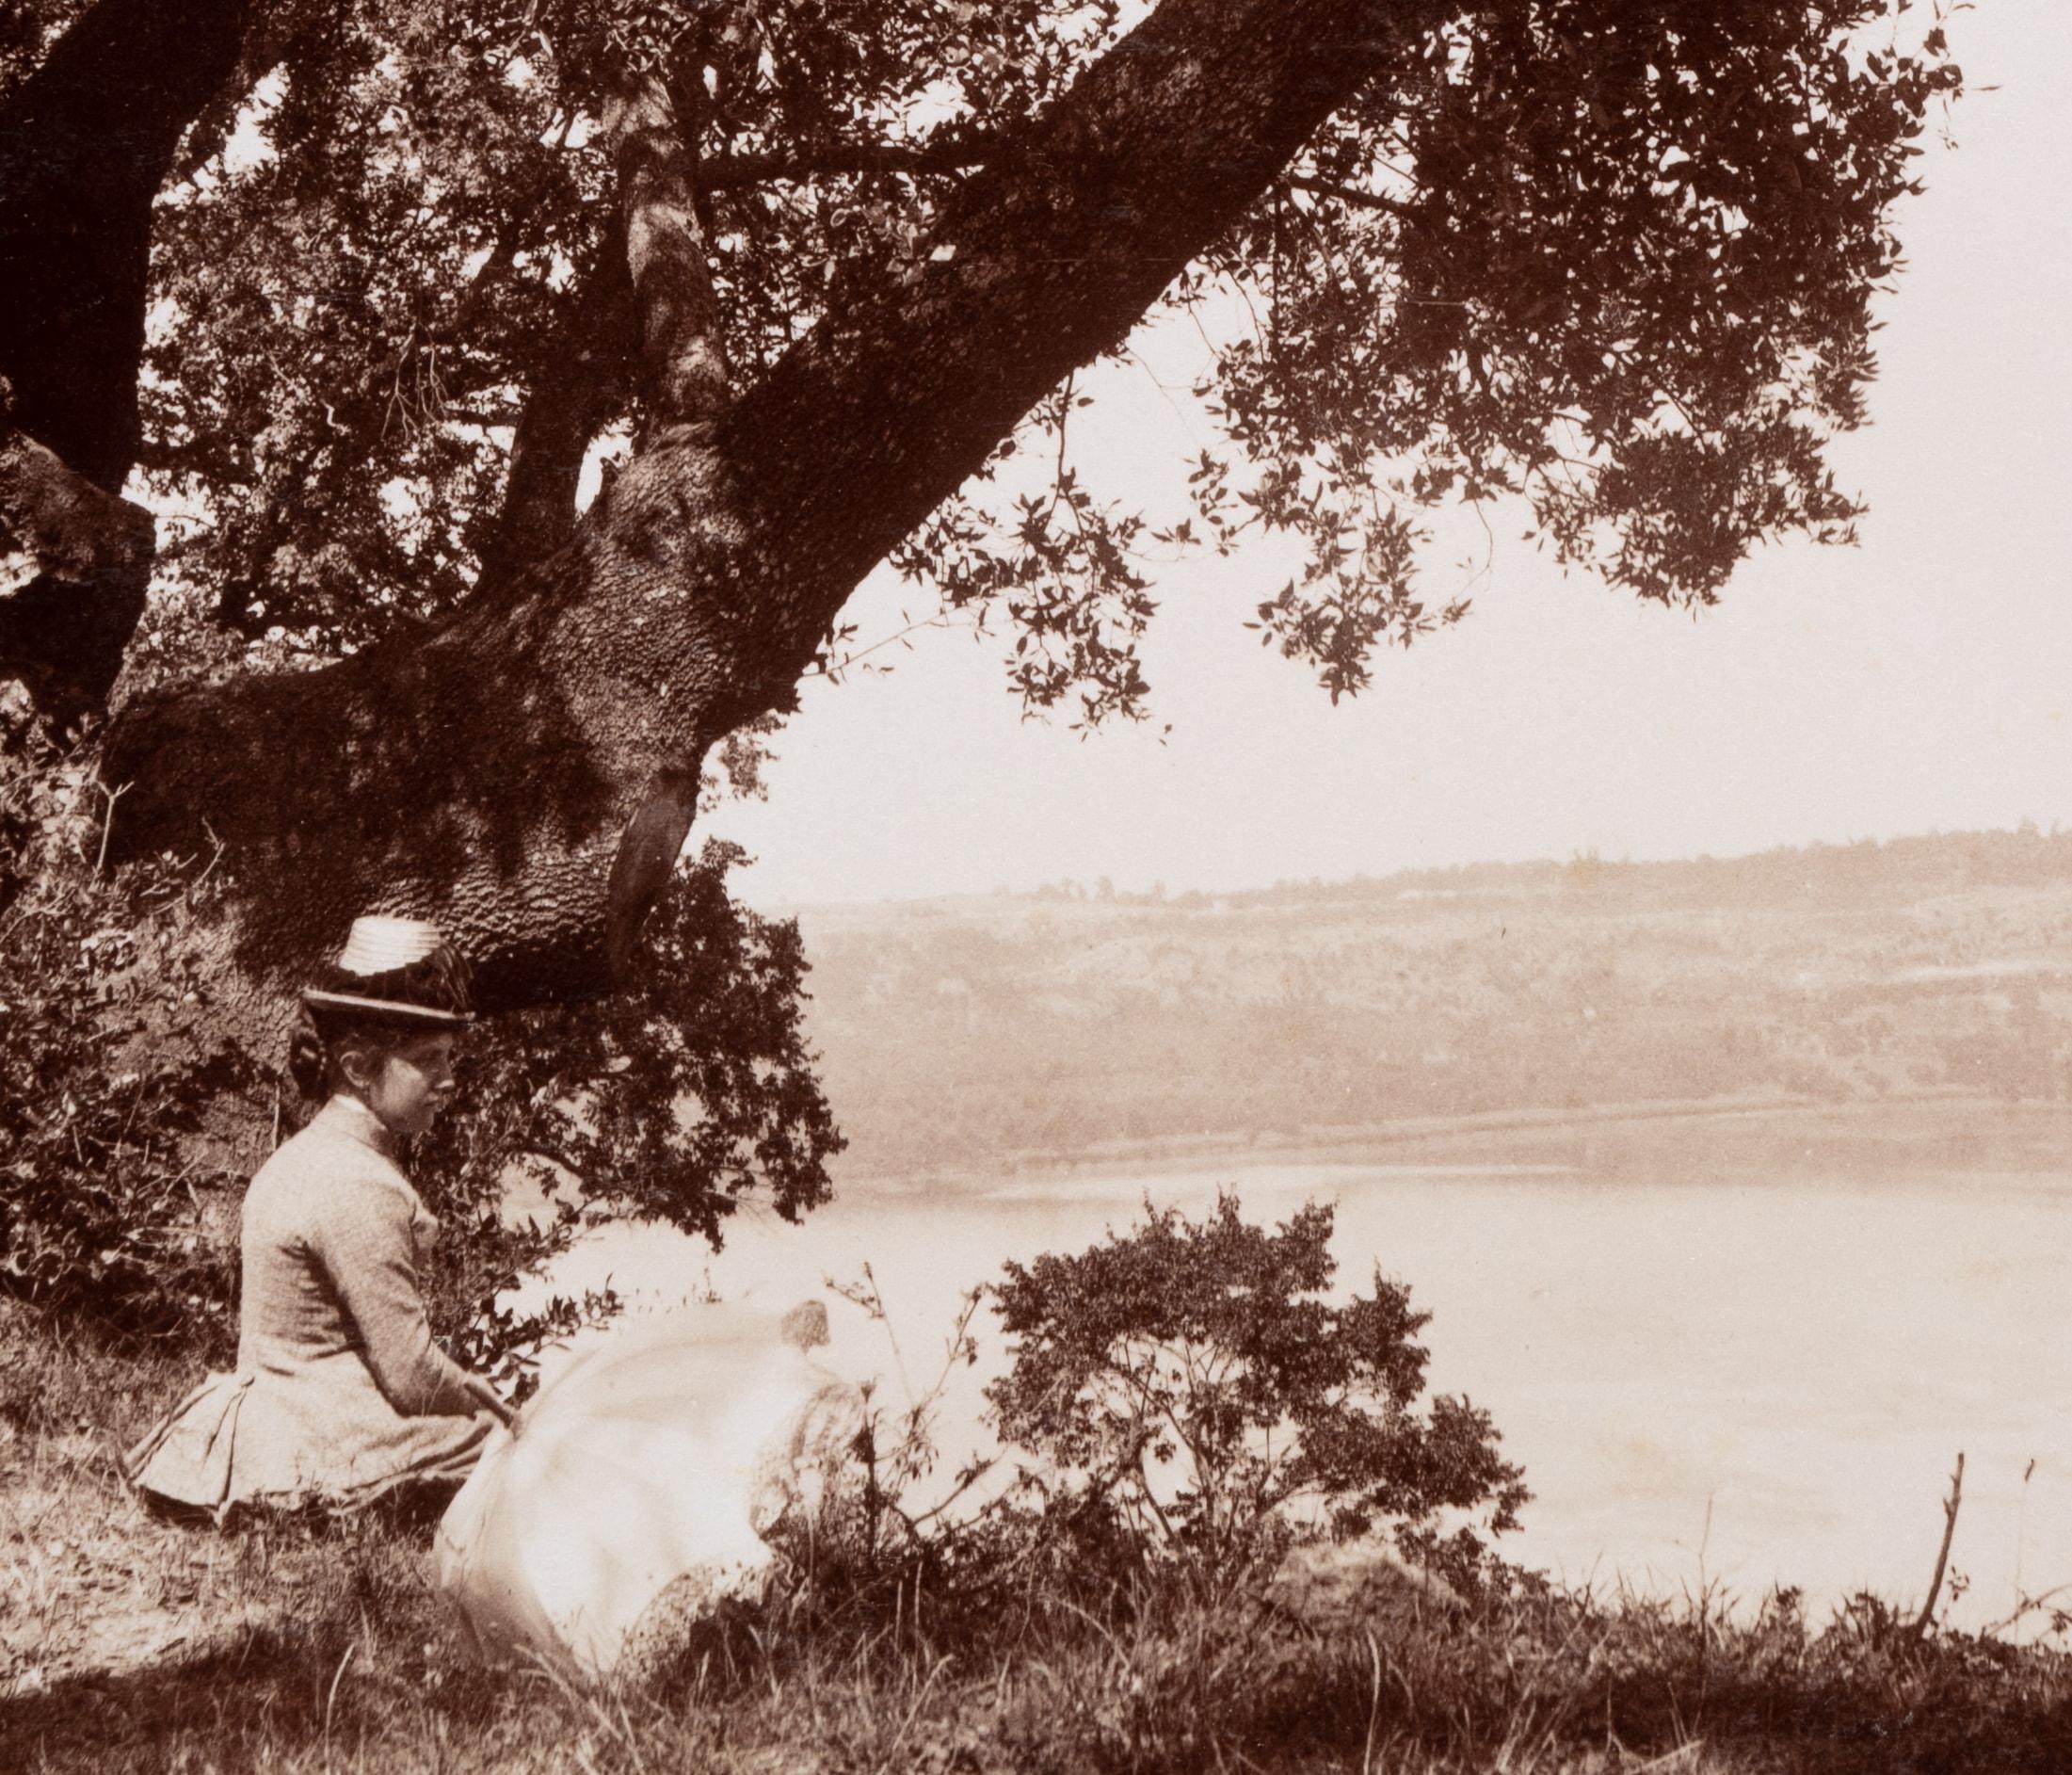 Domenico Anderson (1854 Rom - 1938 ibid.): View over Lake Albano with woman with parasol resting looking at the lake, c. 1880, albumen paper print

Technique: albumen paper print, mounted on Cardboard

Date: c. 1880

Description: Original photograph